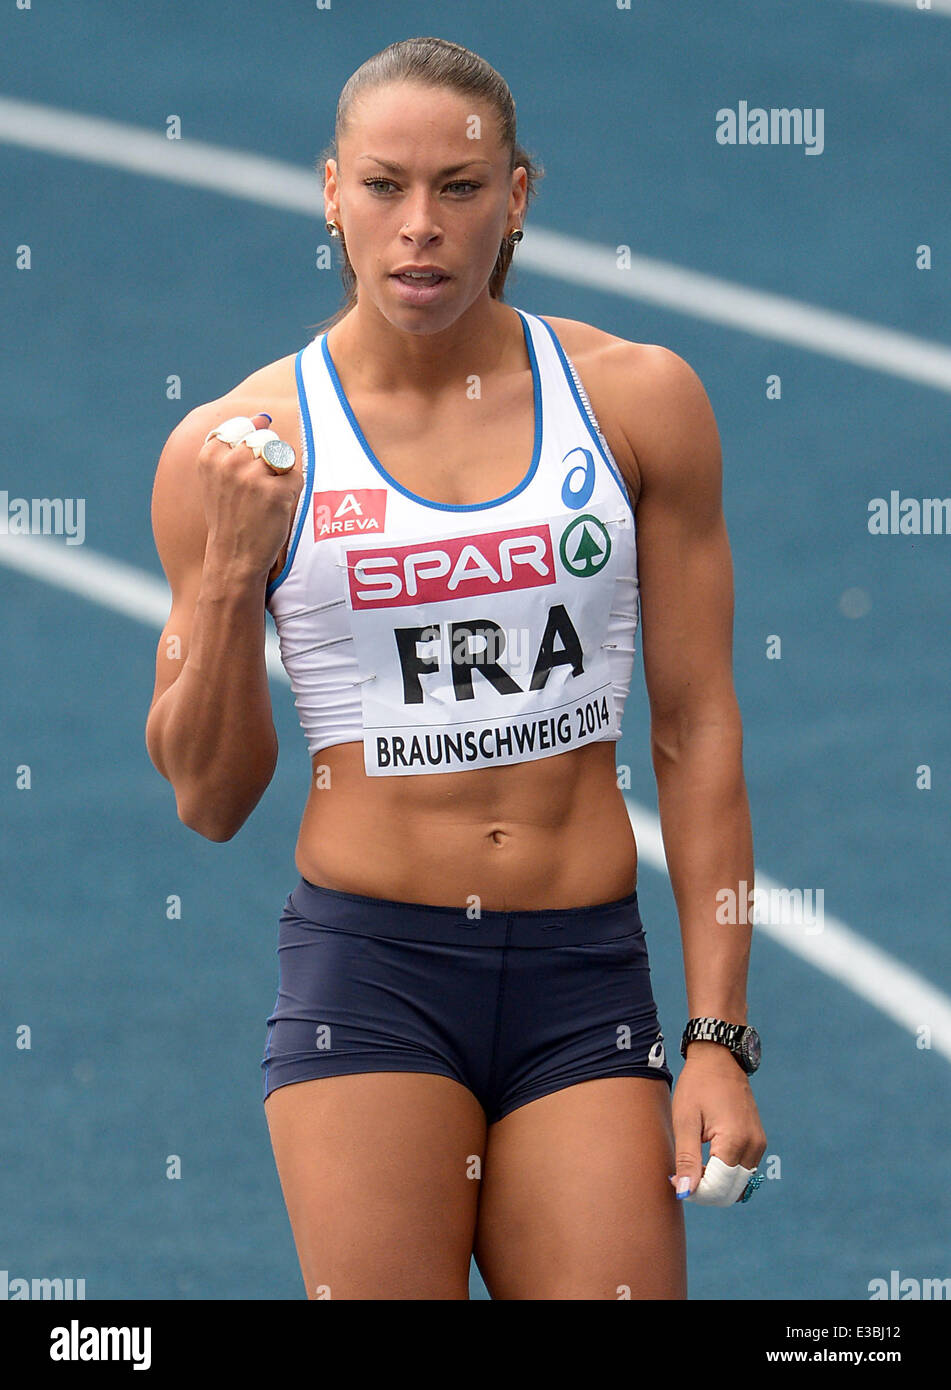 Braunschweig, Germany. 22nd June, 2014. France's Cindy Billaud in action during the women's 100 m hurdles race at the European Athletics Team Championships in the Eintracht Stadion in Braunschweig, Germany, 22 June 2014. Photo: Peter Steffen/dpa/Alamy Live News Stock Photo